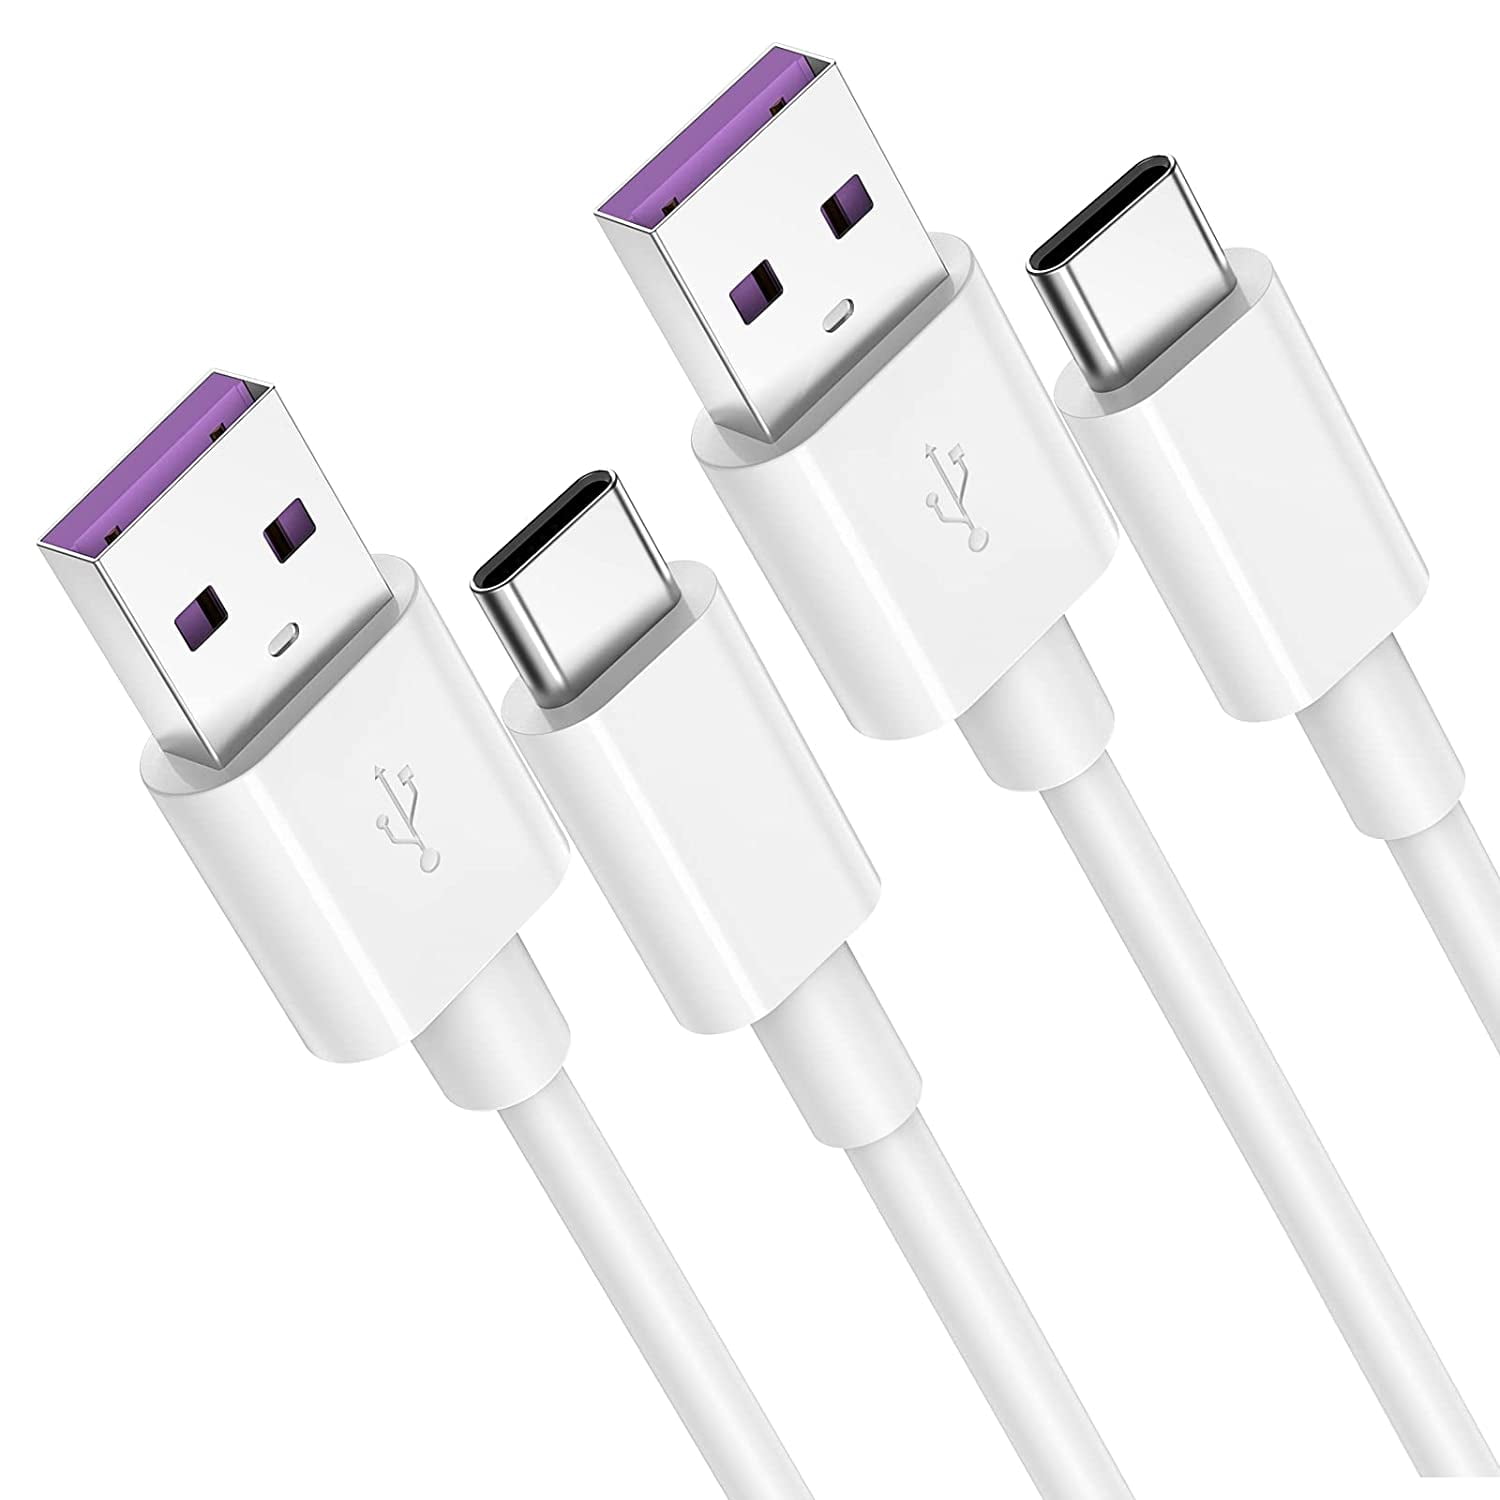 USB C Cable 5A, 40W [2 Pack 2m] USB Type C Super Charger Cable USB C to A Charging Cord for Huawei P30 Pro, P20 Lite, P20, P10, Mate 20, 20